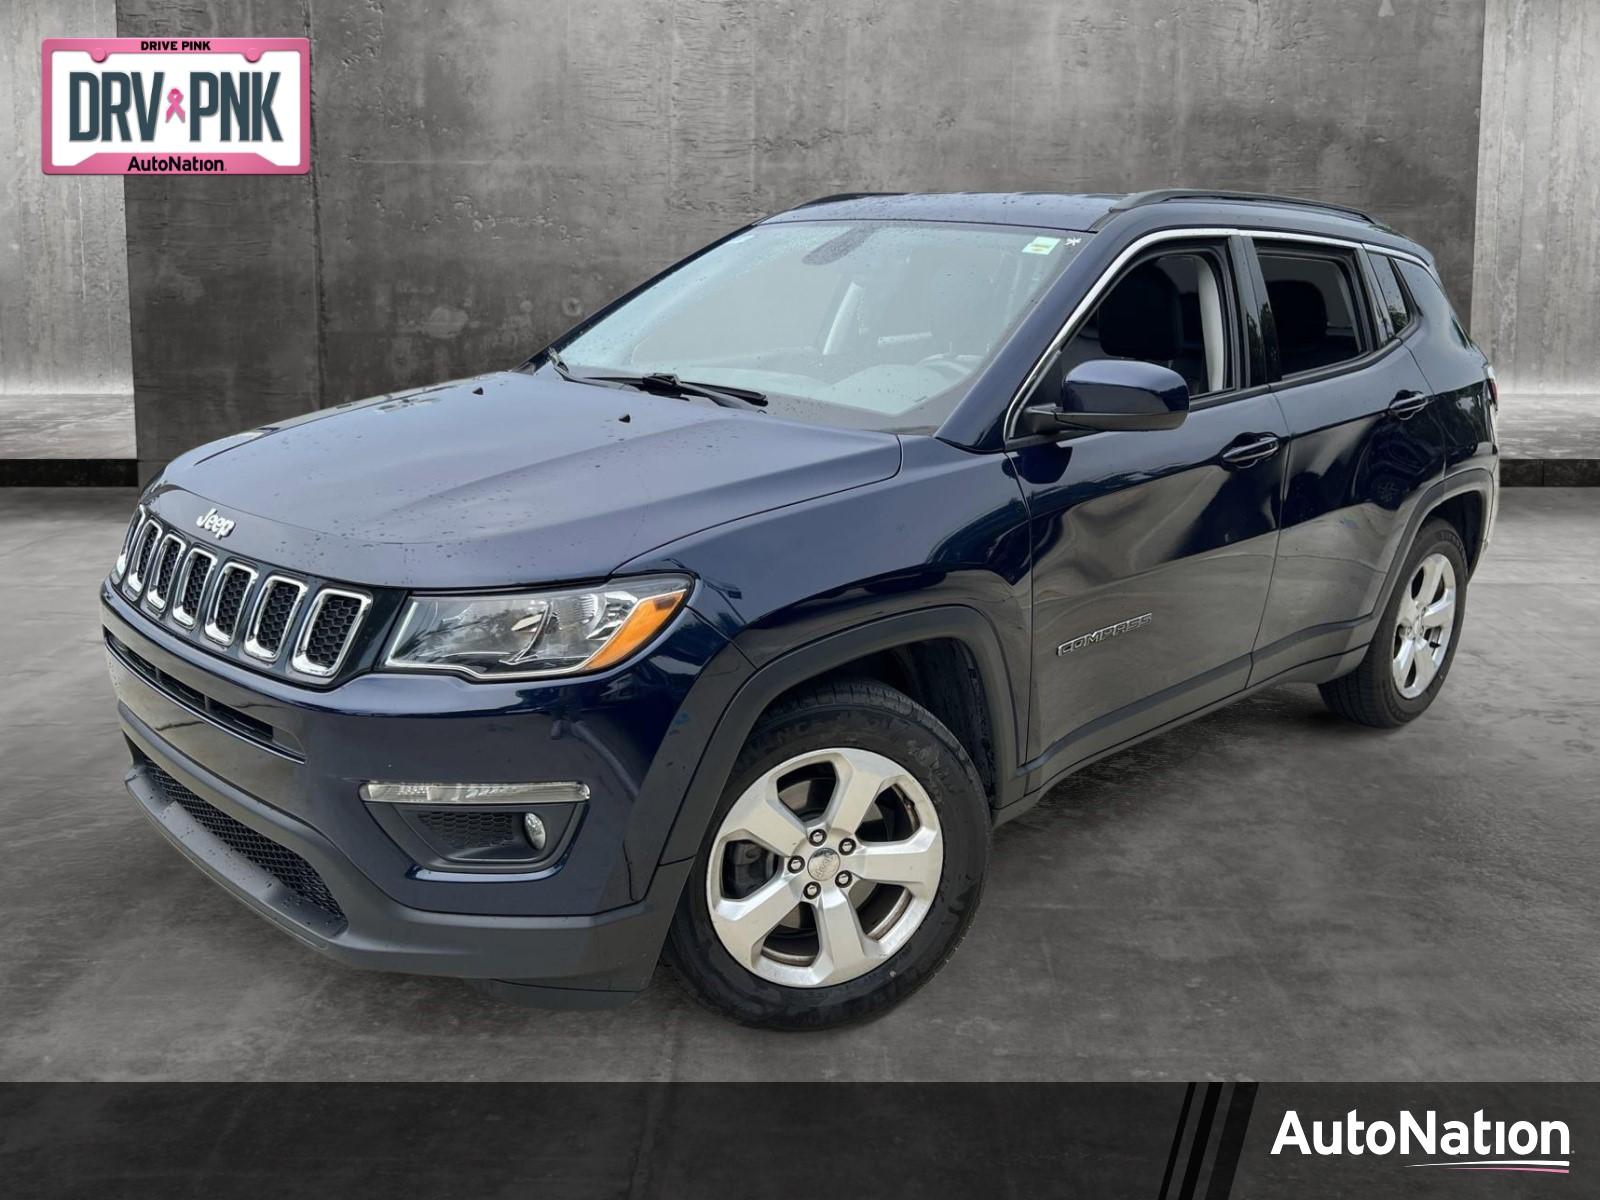 2019 Jeep Compass Vehicle Photo in Pembroke Pines, FL 33027